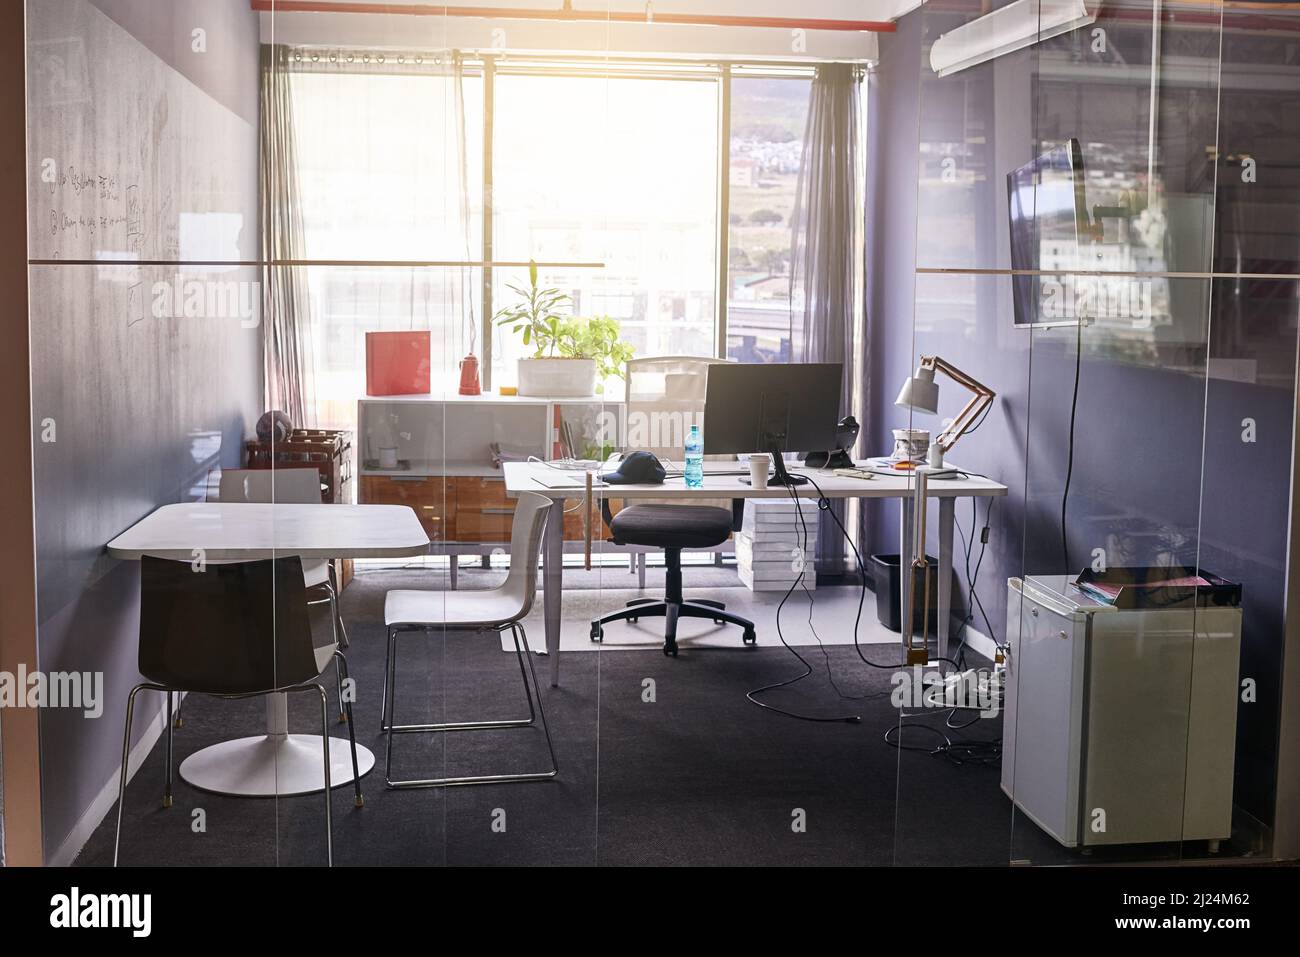 Before the office kicks into gear. Shot of an empty office. Stock Photo